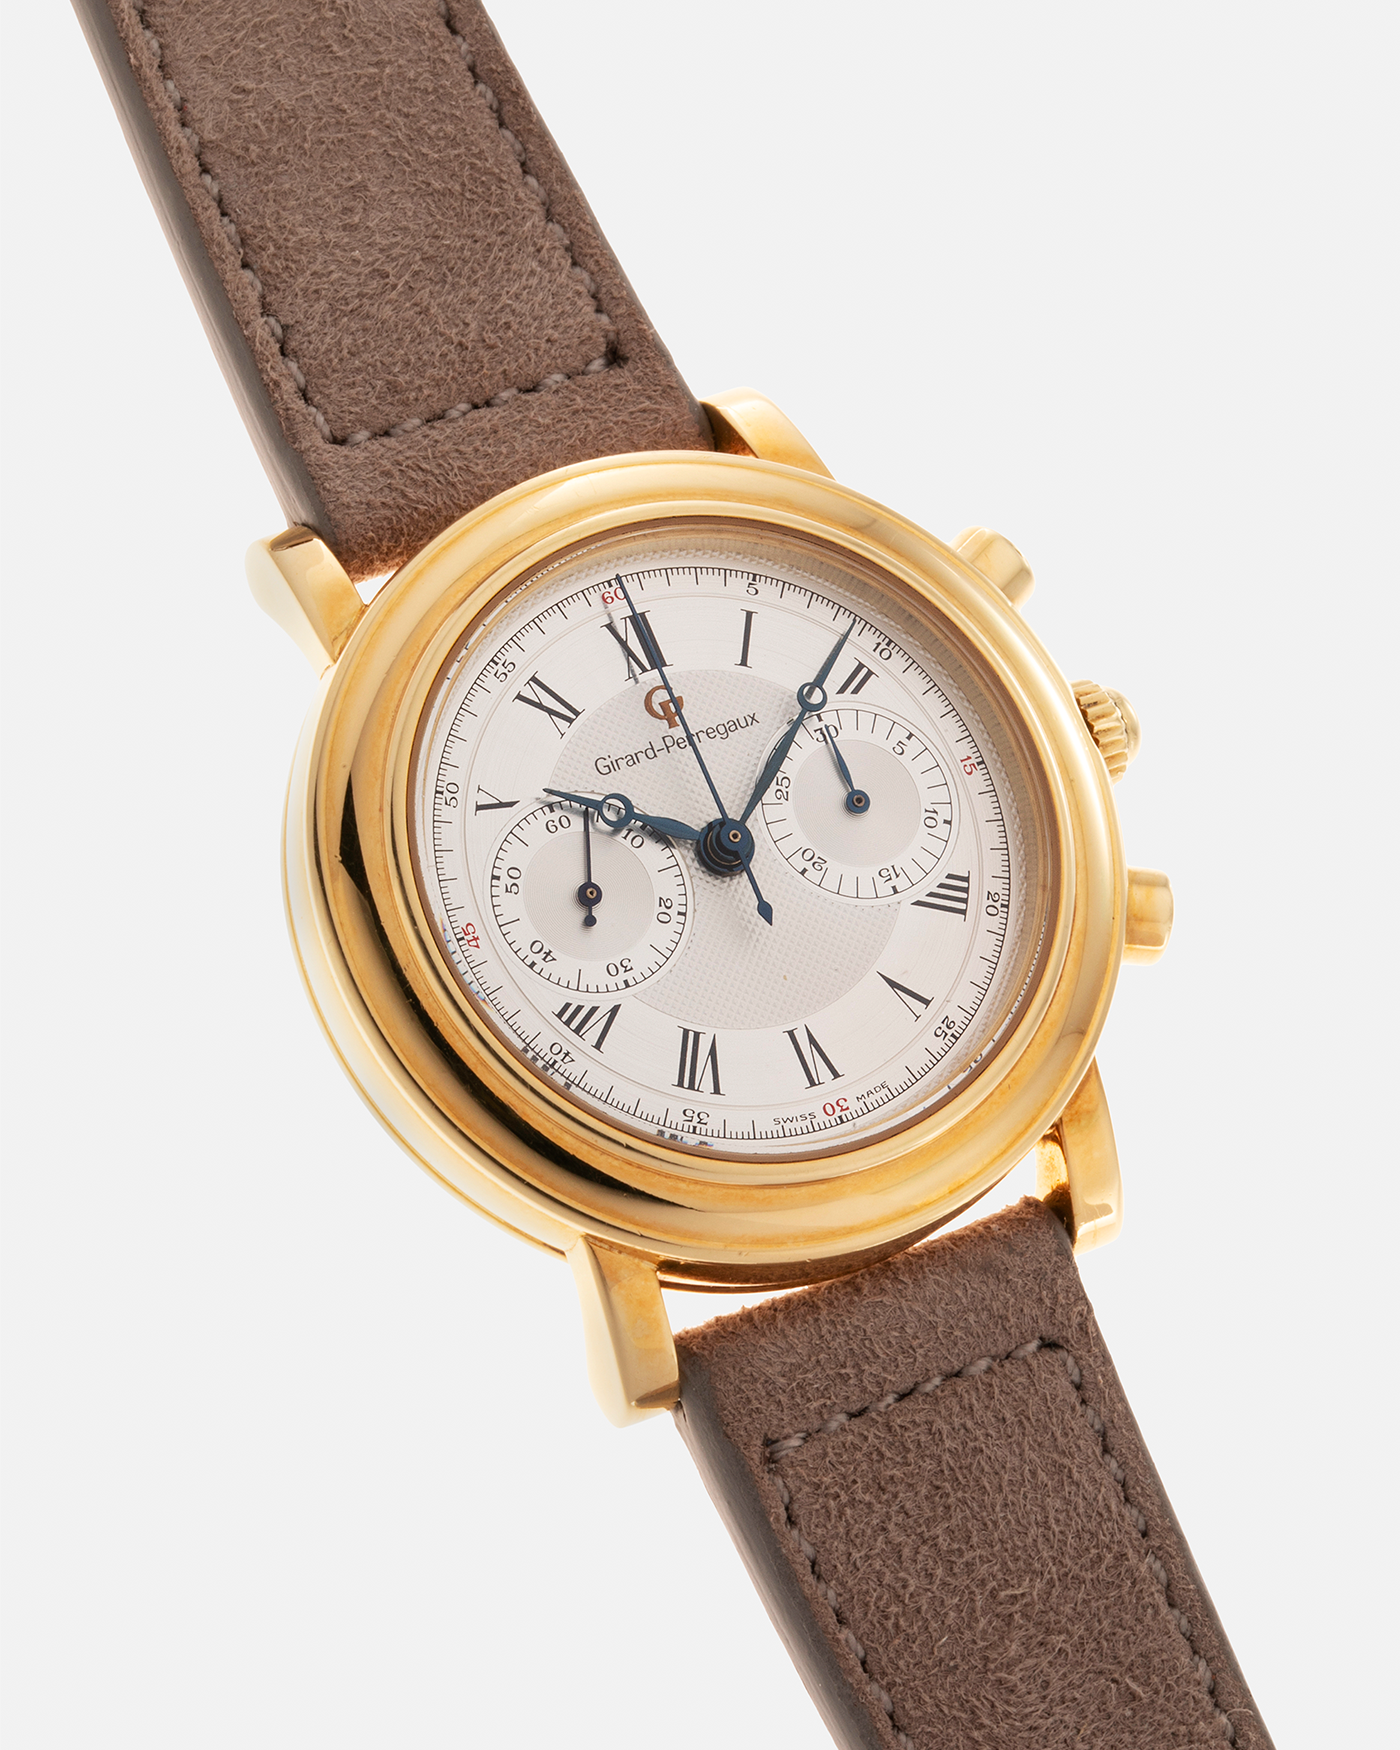 Brand: Girard Perregaux Year: 1990’s Reference Number: 47930 Material: 18k Yellow Gold Movement: Lemania Cal. 1872  Case Diameter: 38mm Strap: Molequin Taupe Suede Strap and 18k Yellow Gold Girard Perregaux Tan Buckle